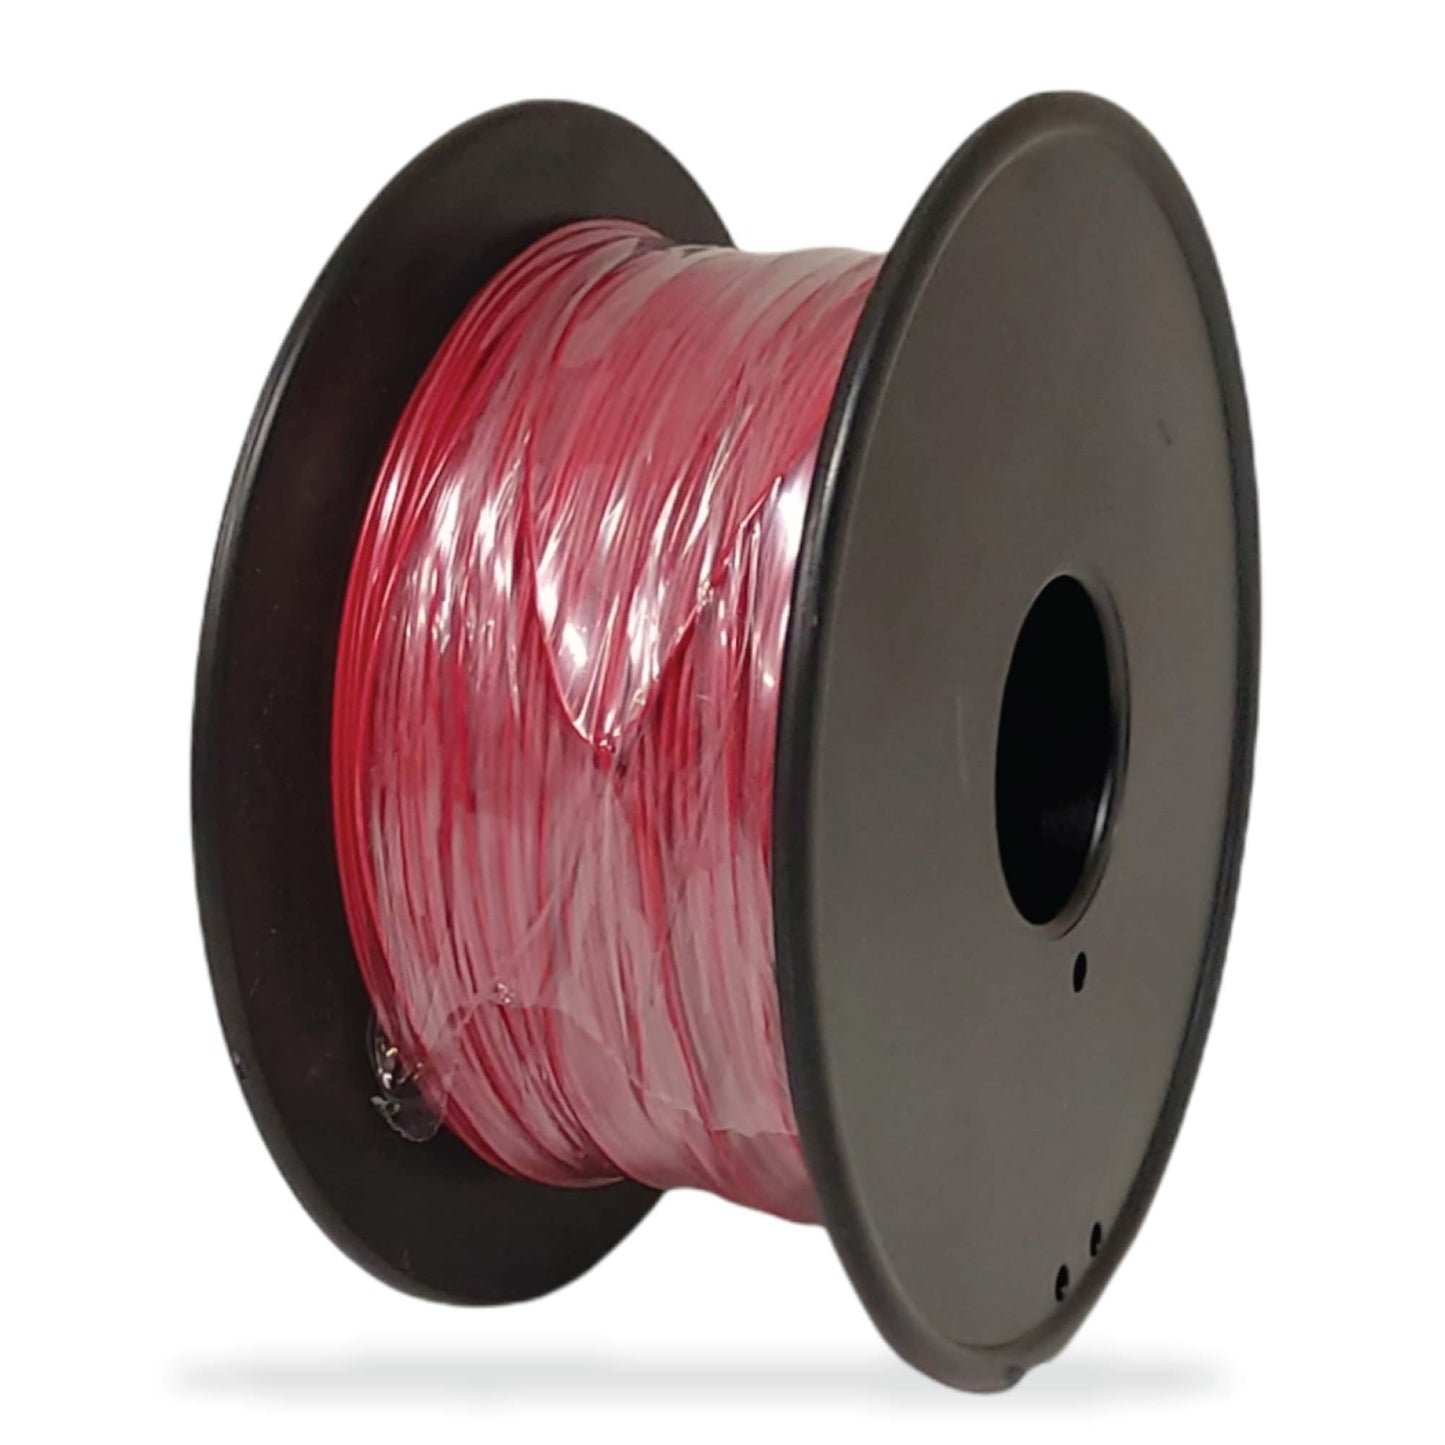 500m Dog Underground Boundary Fence Wire Invisible Cable - For TP16 Collar